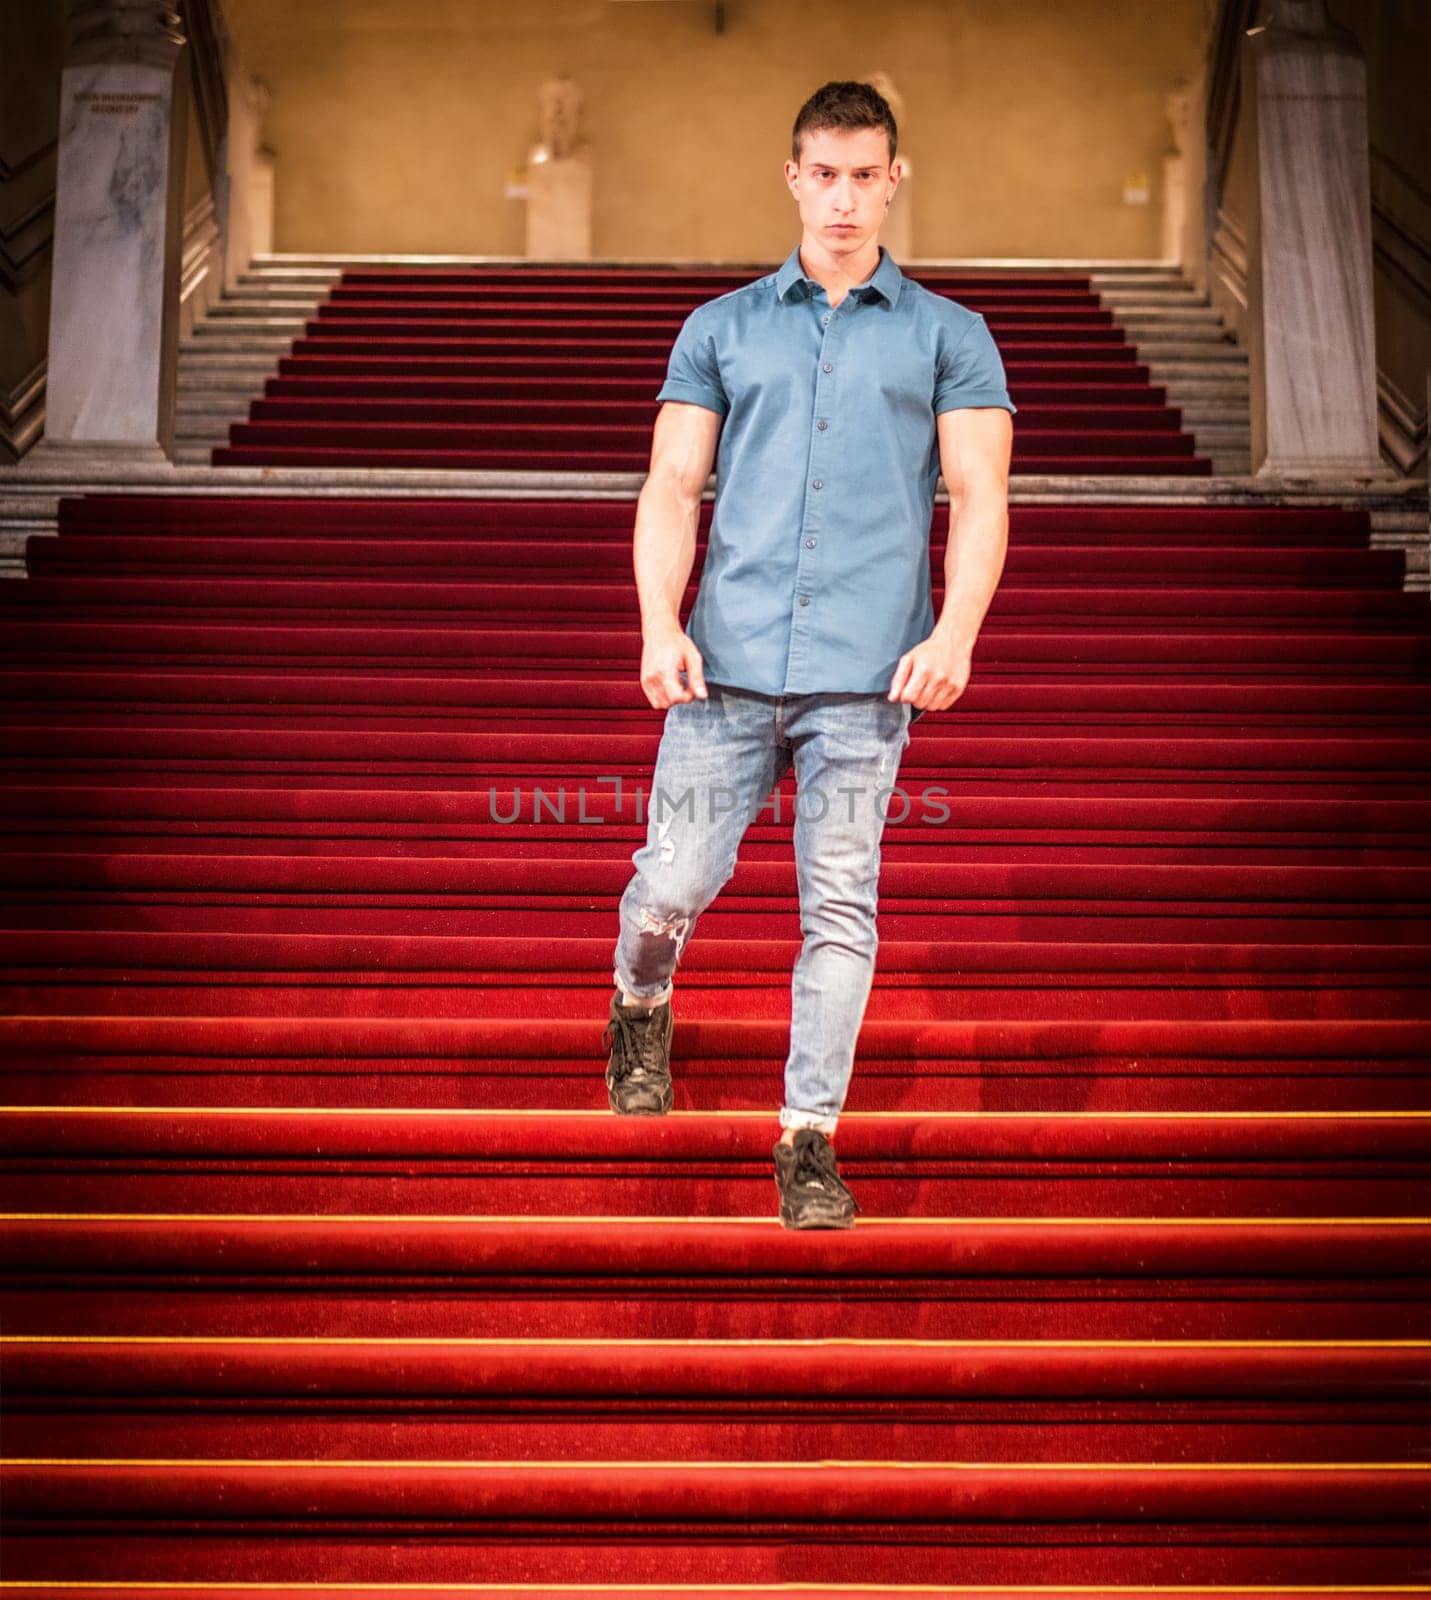 A young fit man standing on a red carpeted staircase, walking down.